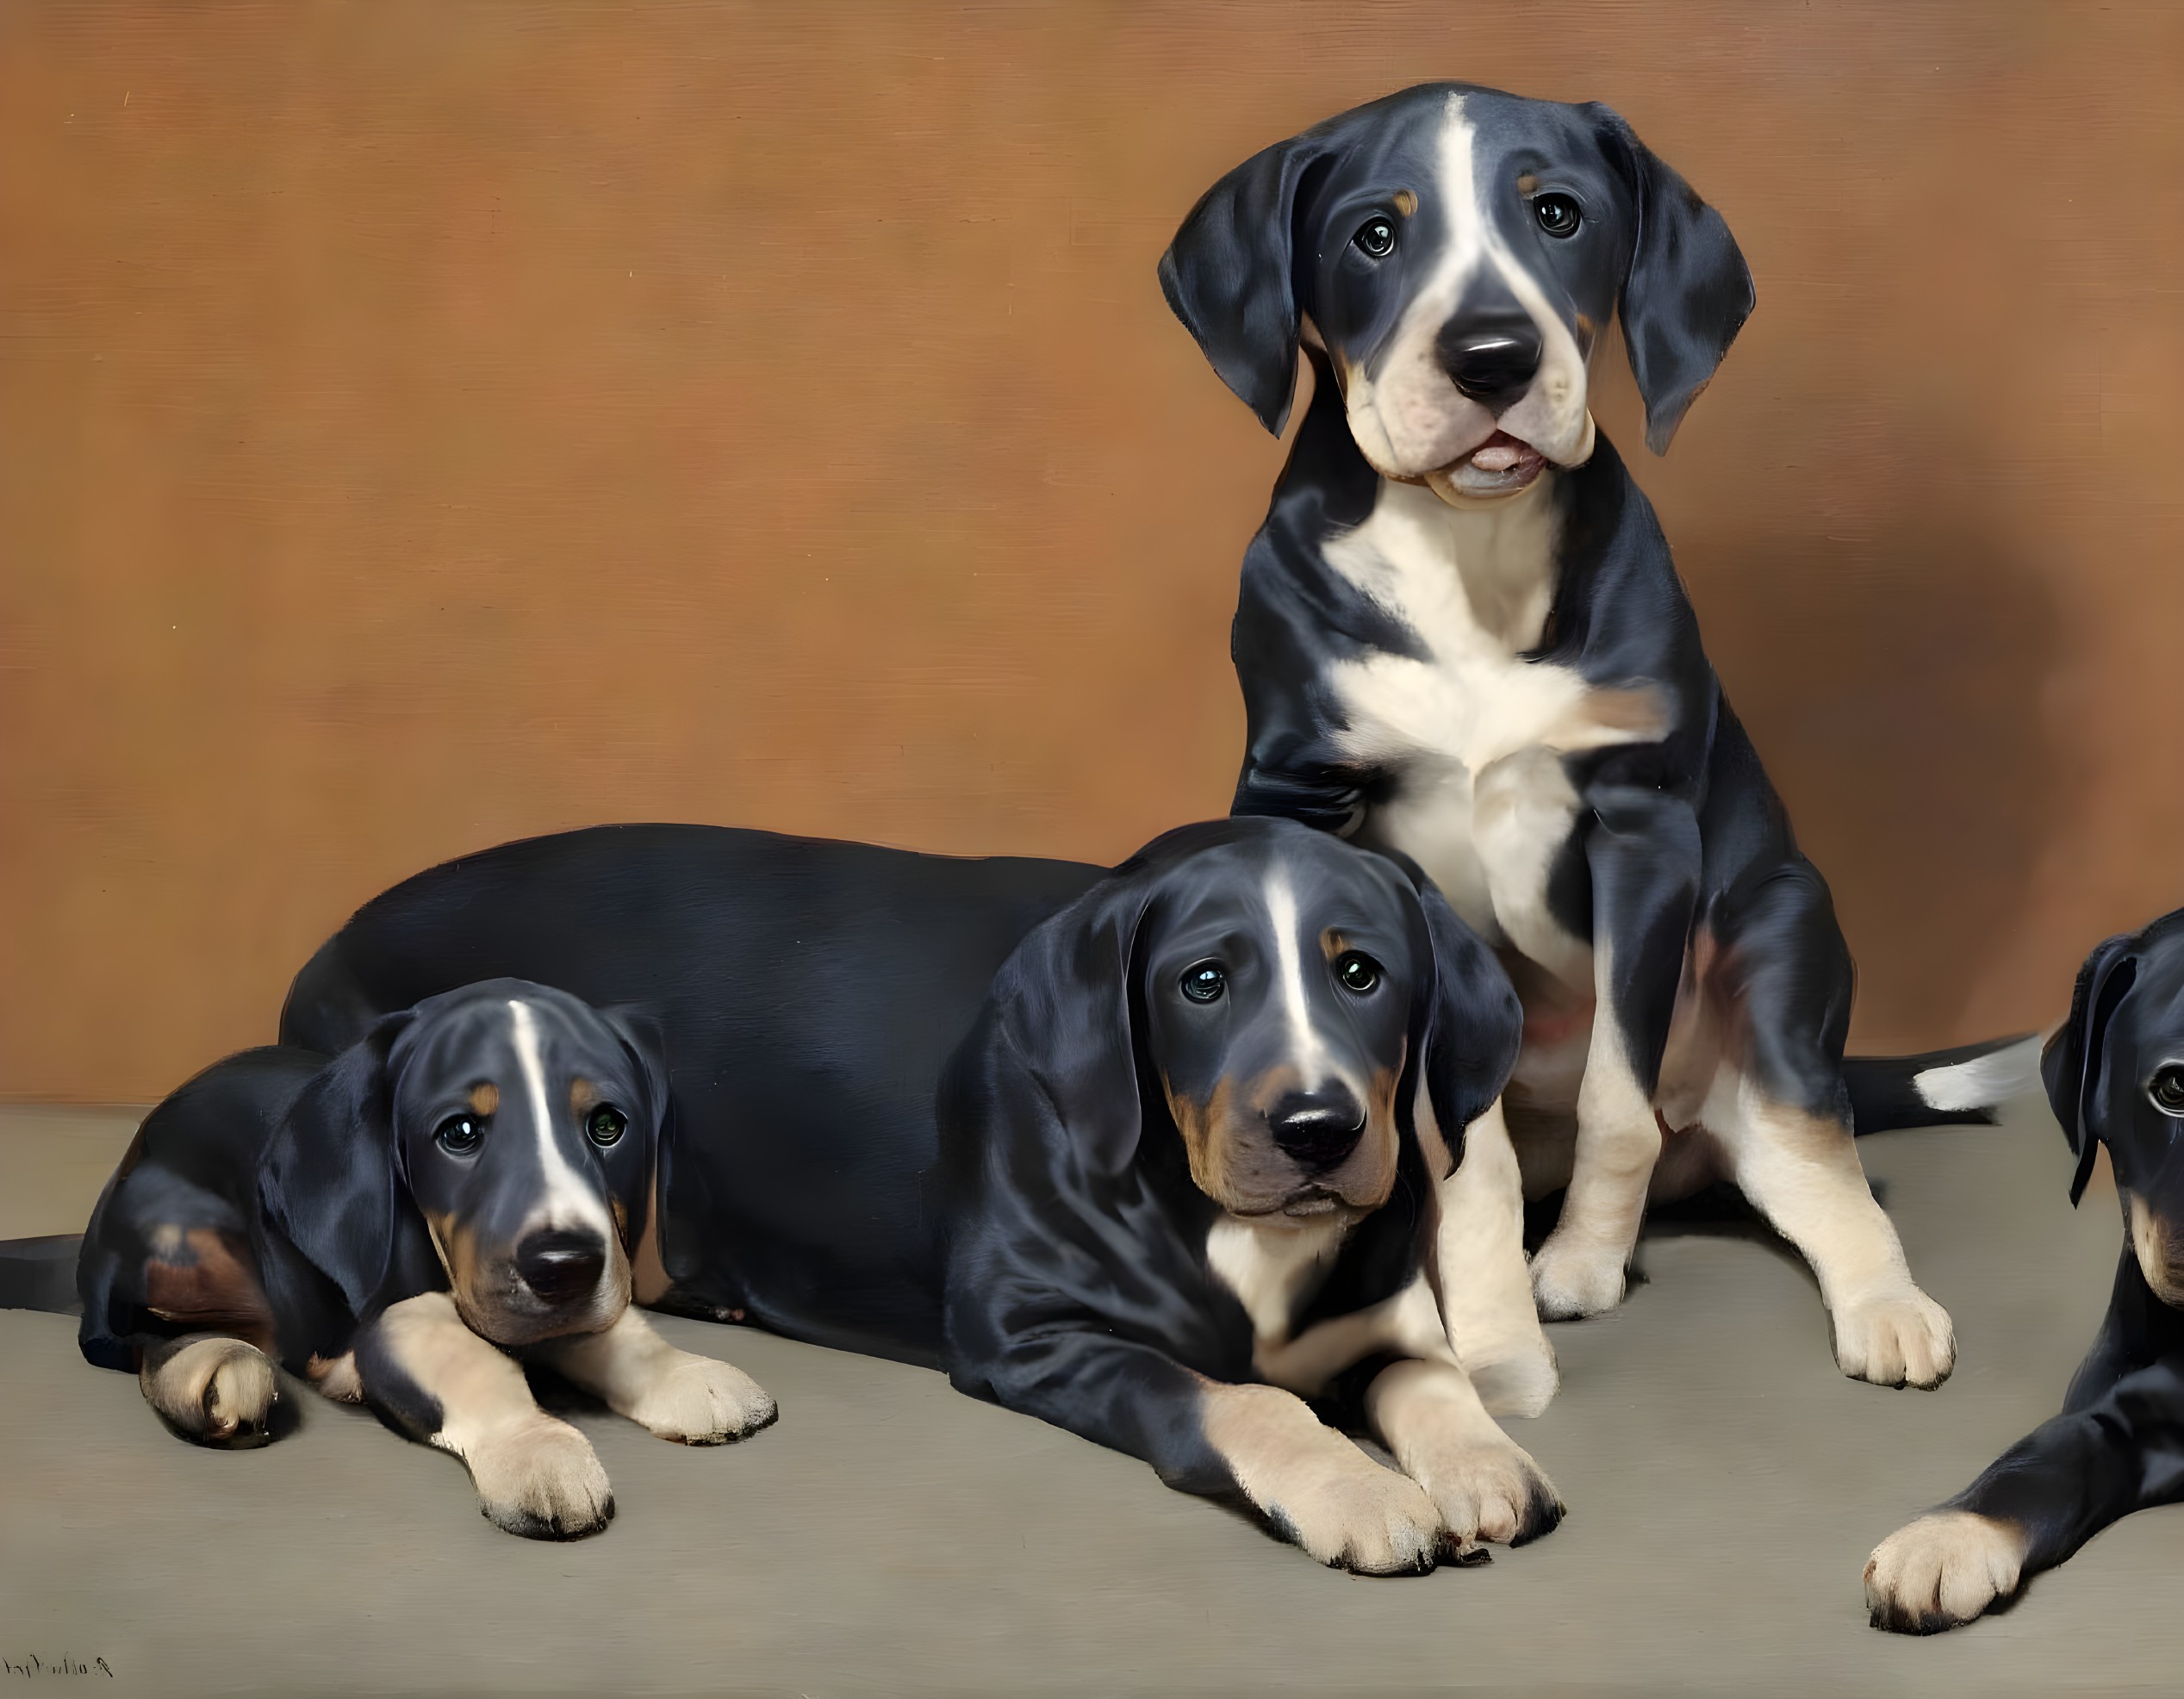 Three Black and Tan Puppies with Floppy Ears on Neutral Background